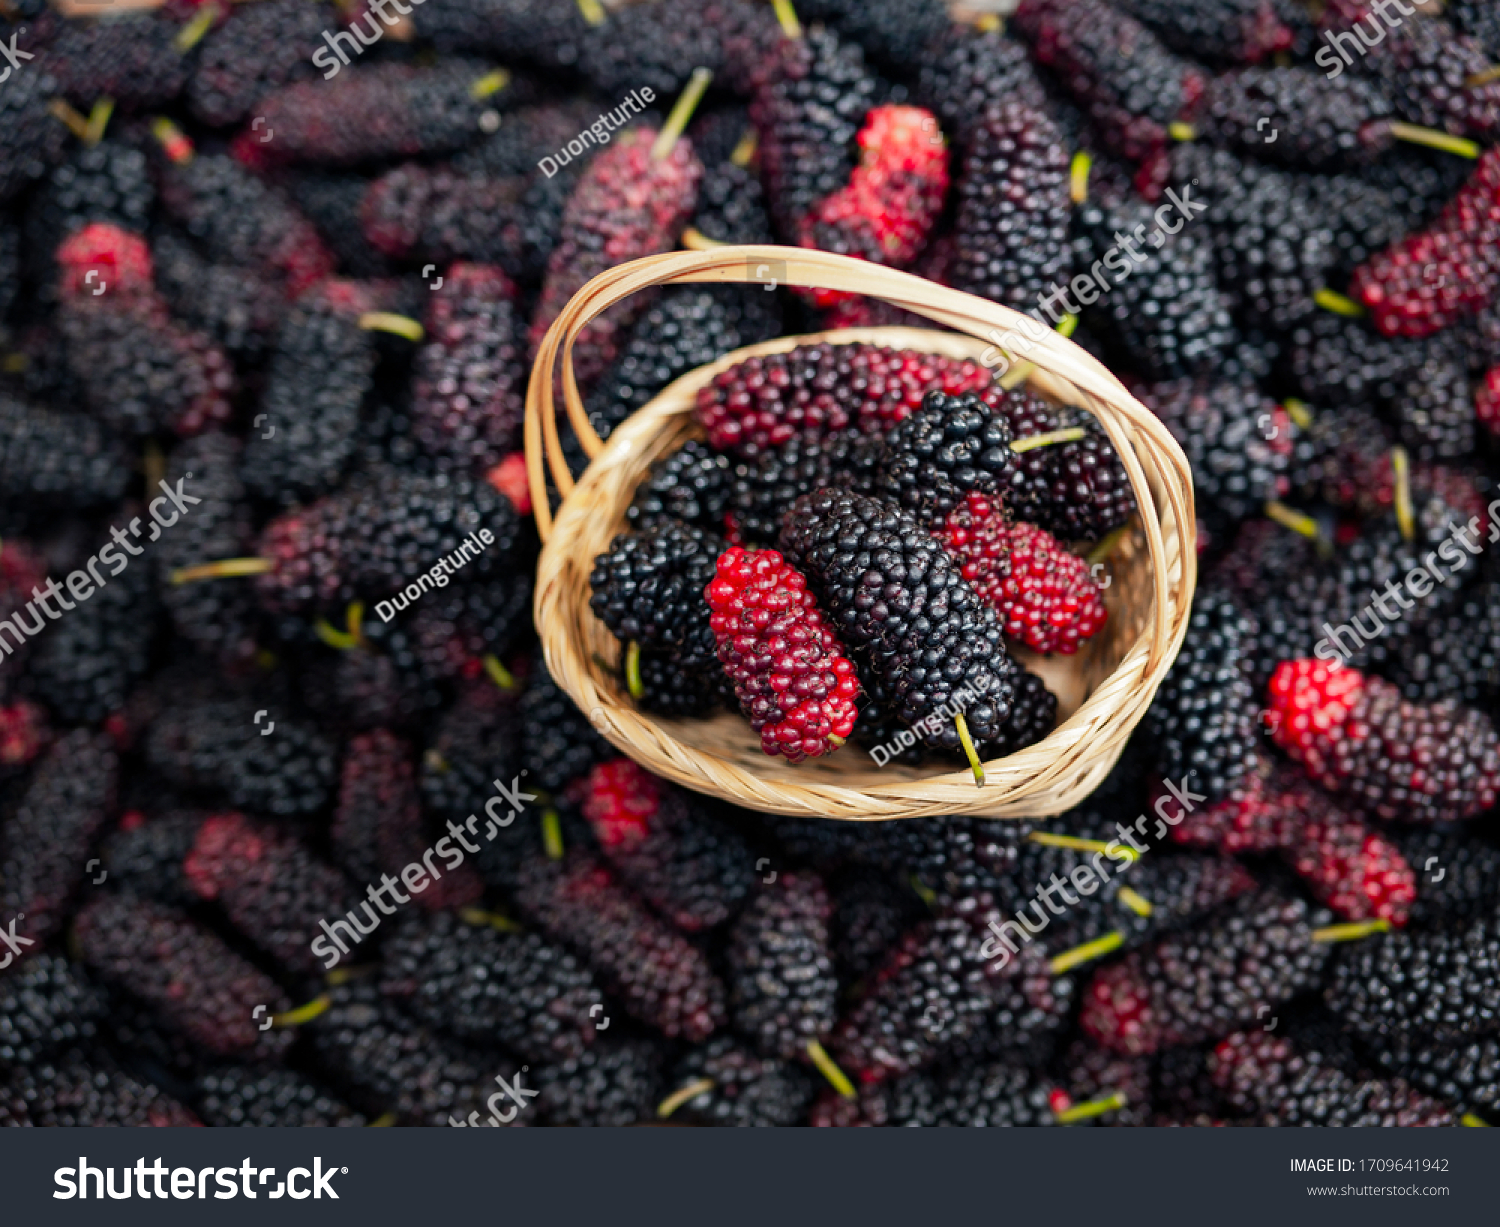 Mulberry in Viet Nam. Mulberry fruit in summertime. Fresh Mulberrys #1709641942